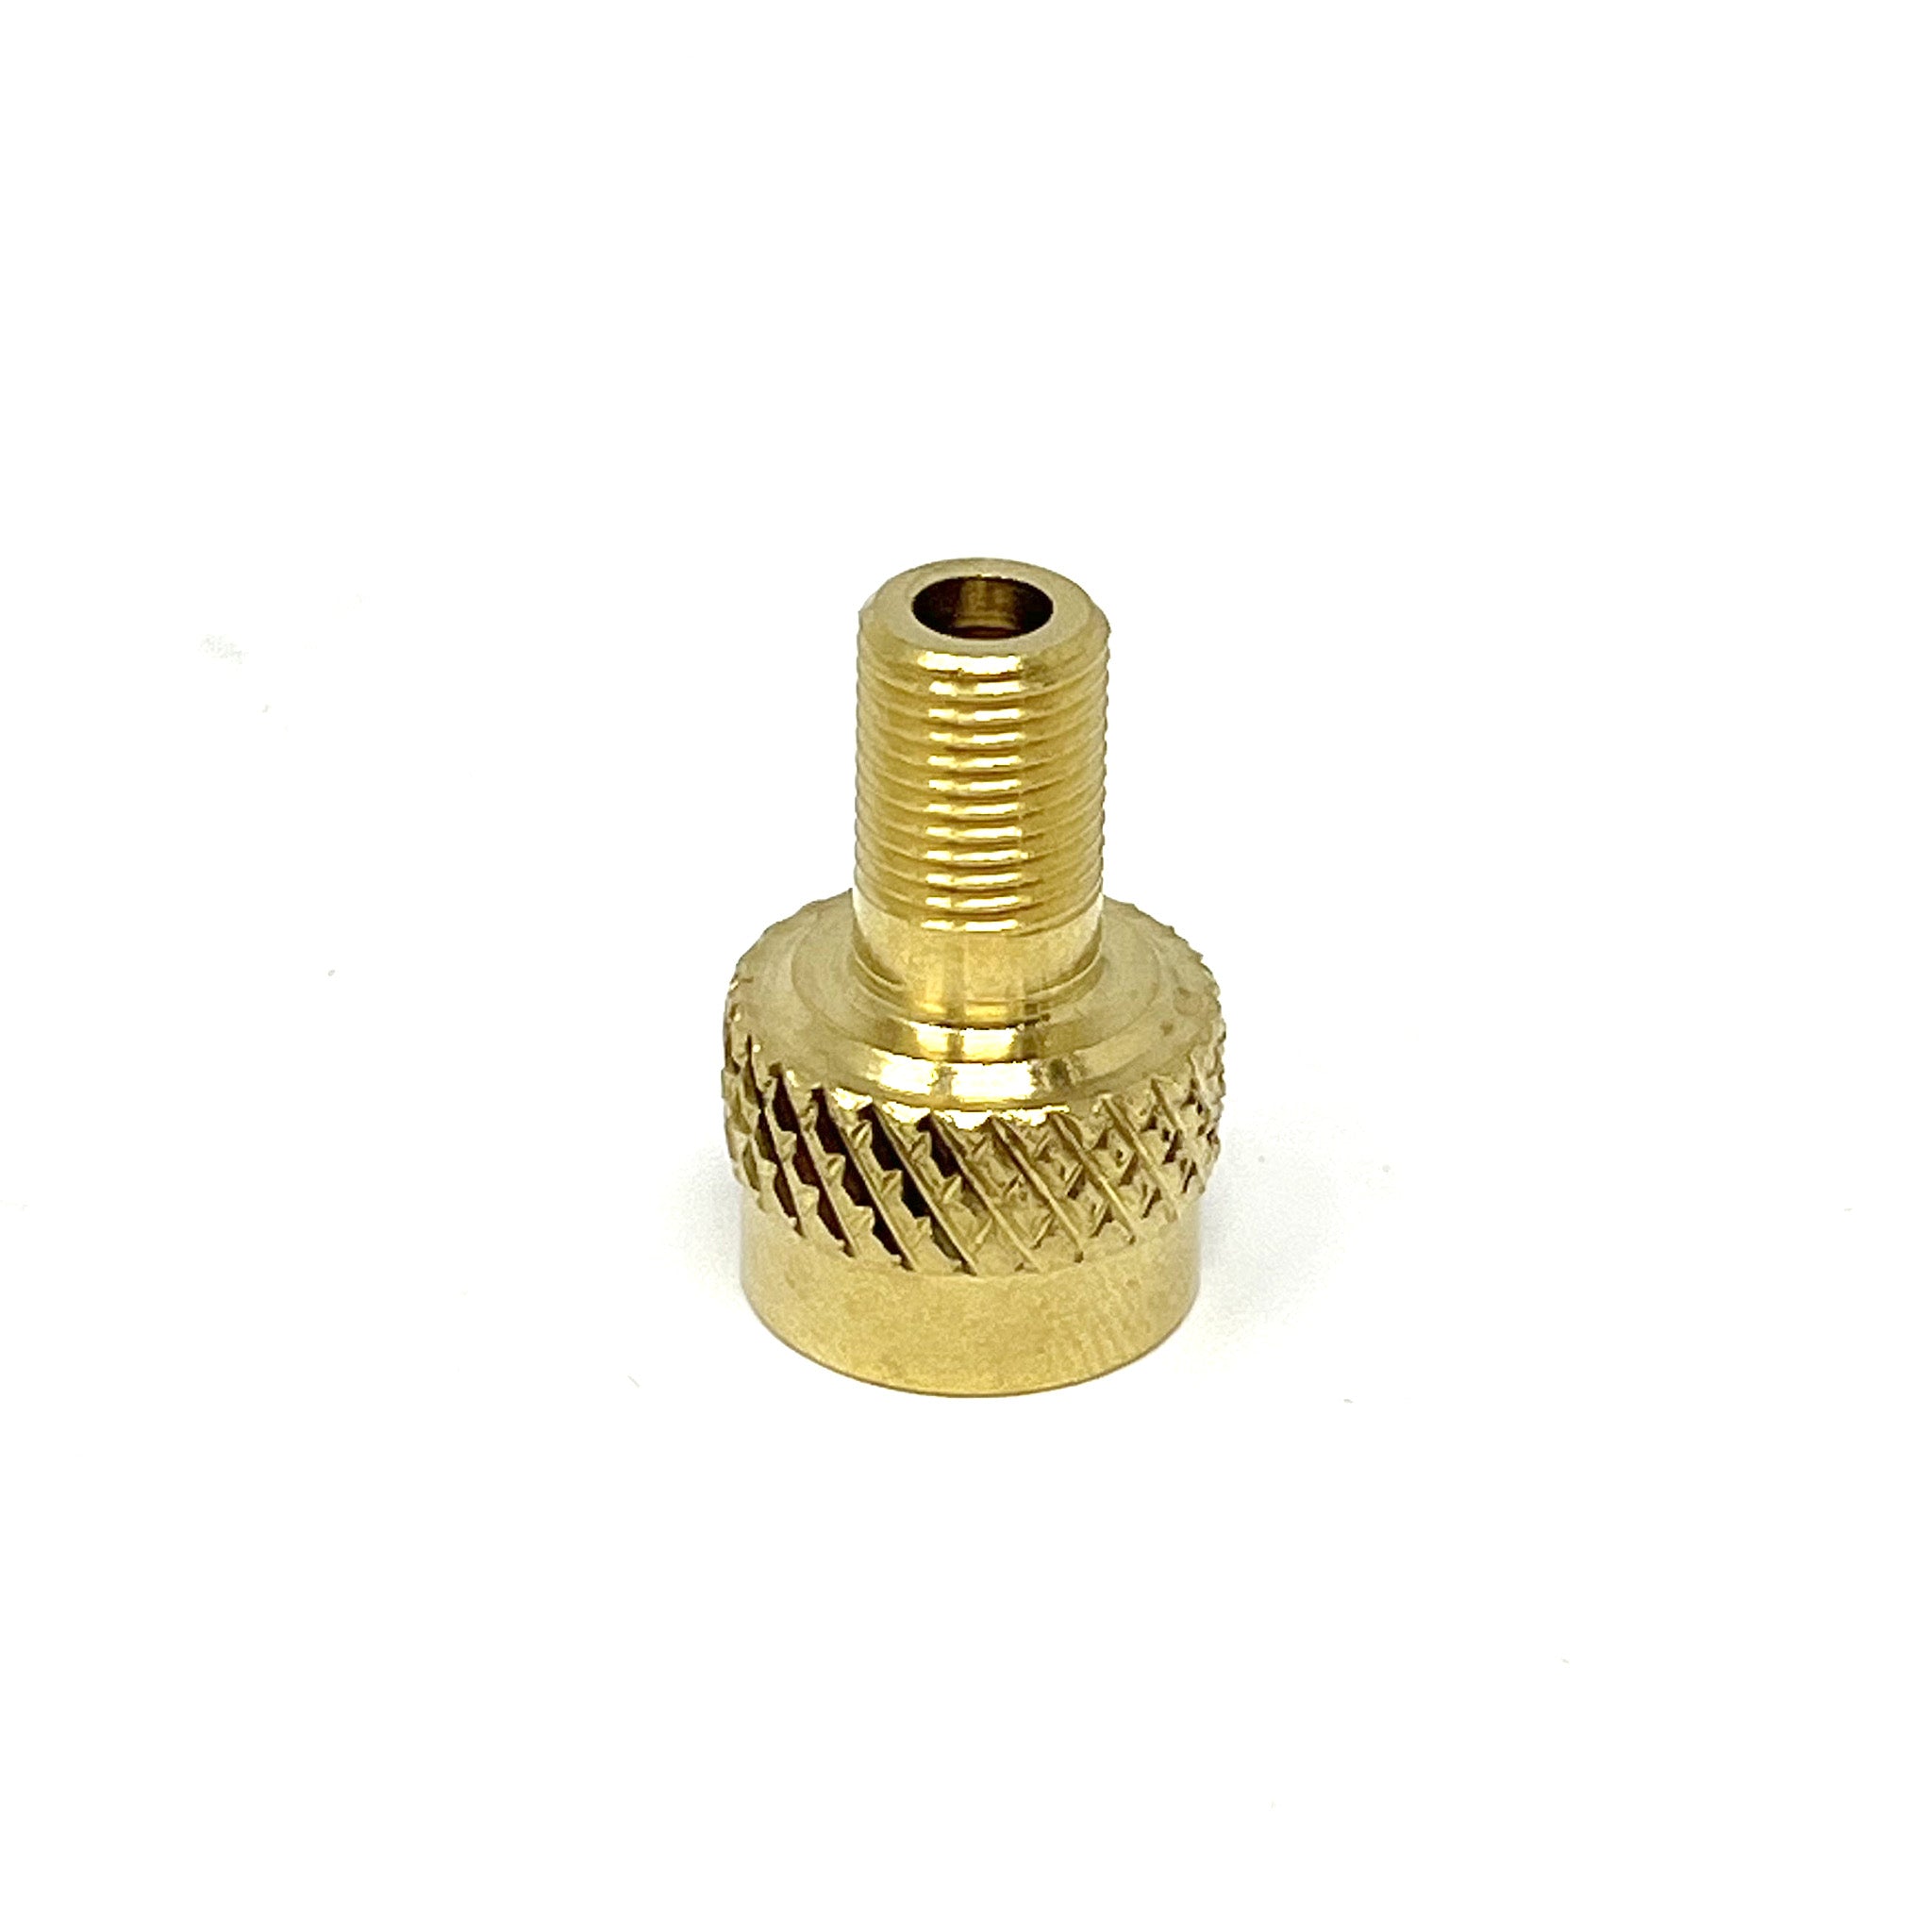 AD1 Style Large Bore Cap Adapter